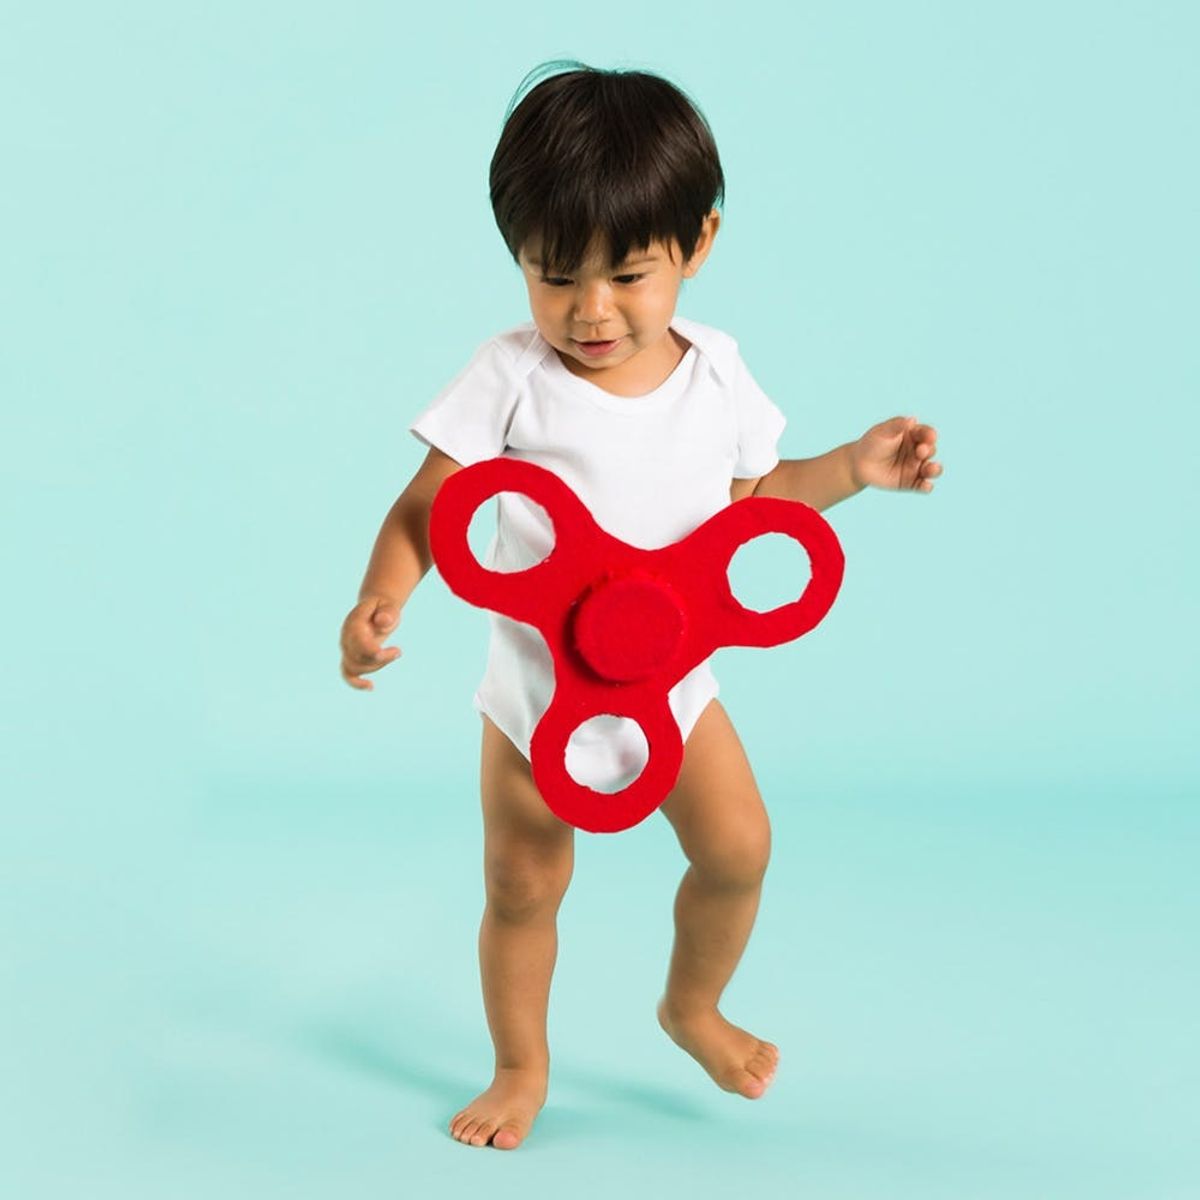 DIY This Fidget Spinner Baby Halloween Costume With Just 4 Materials